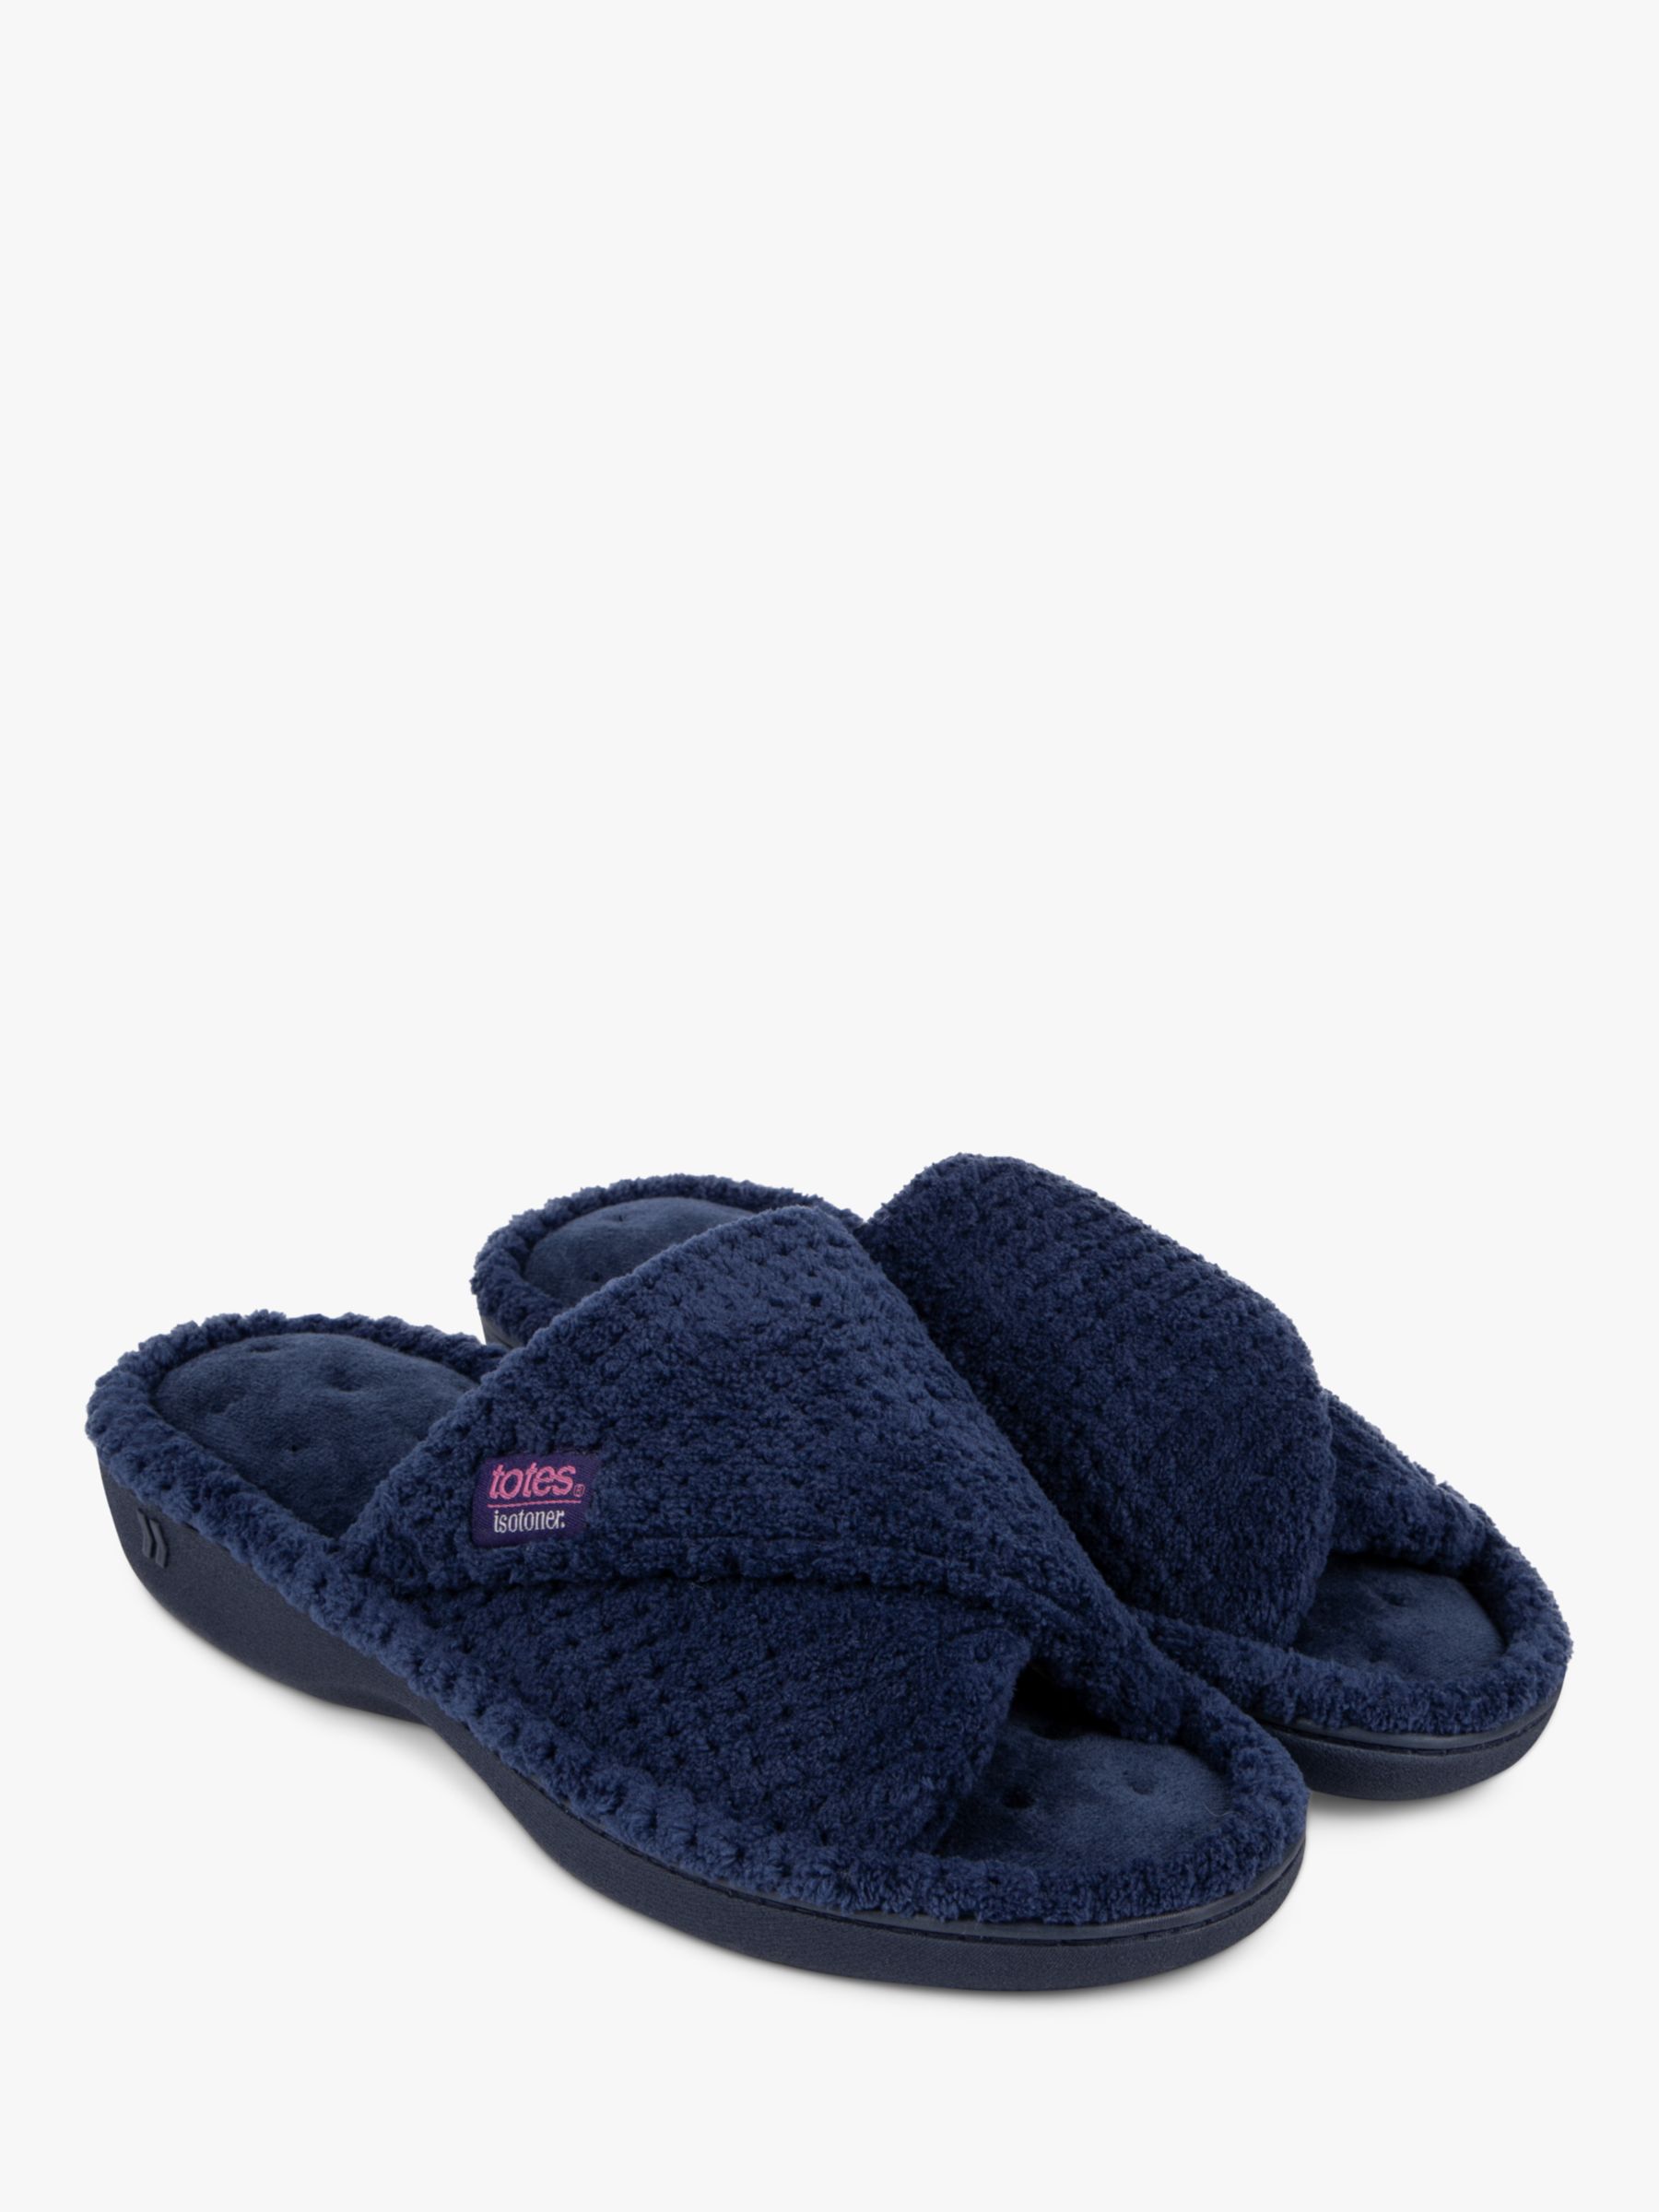 totes Textured Popcorn Turnover Mule Slippers, Navy at John Lewis ...